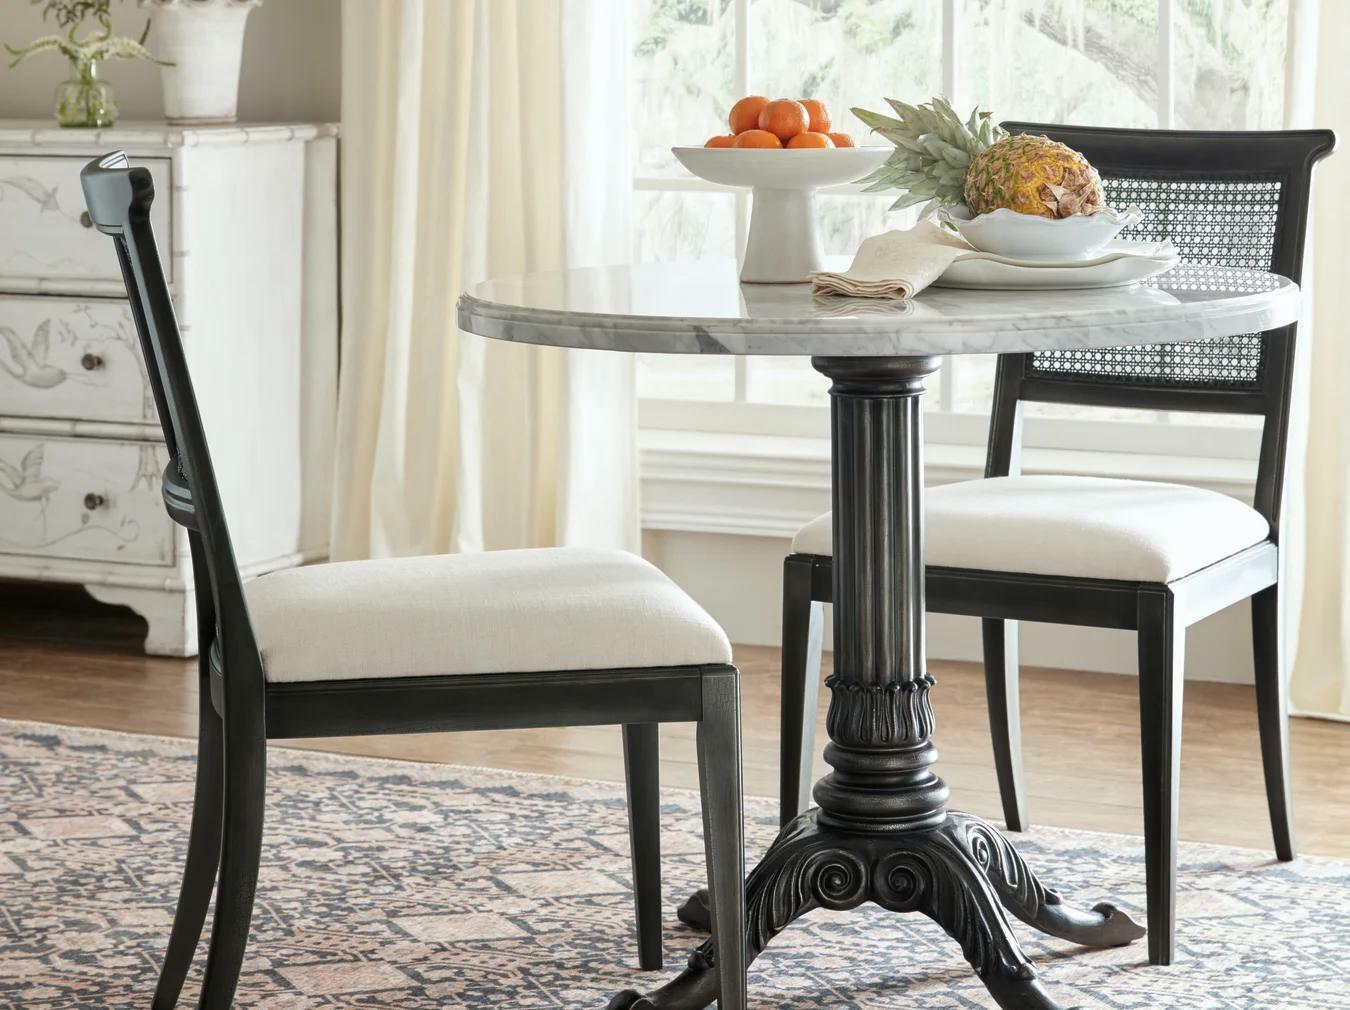 Dining Room Makeover: The Impact of Upholstered Chairs